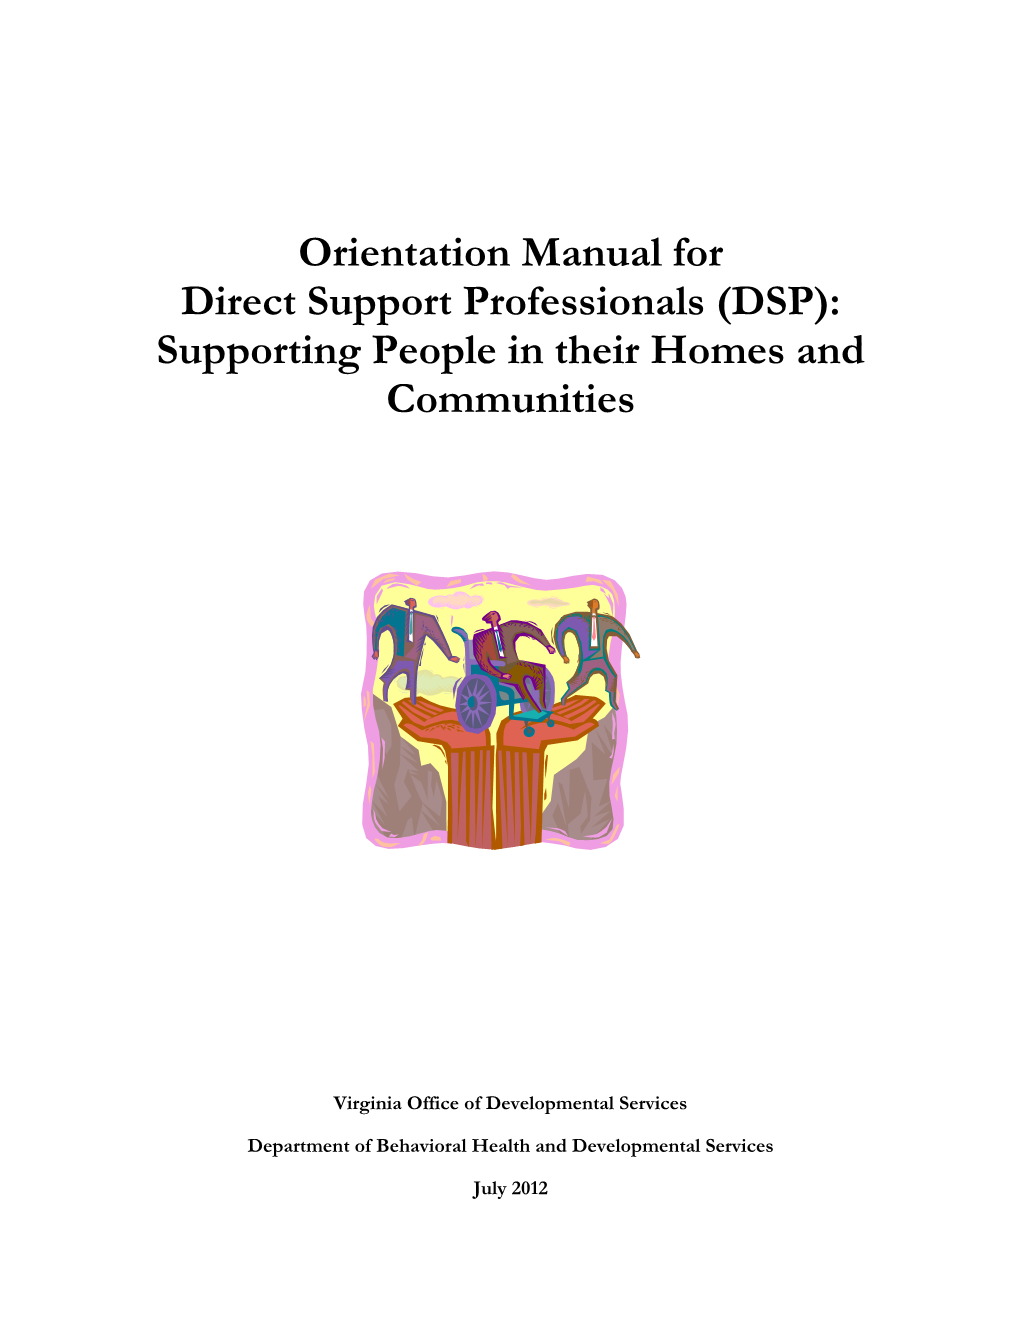 Orientation Manual for Direct Support Professionals (DSP): Supporting People in Their Homes and Communities